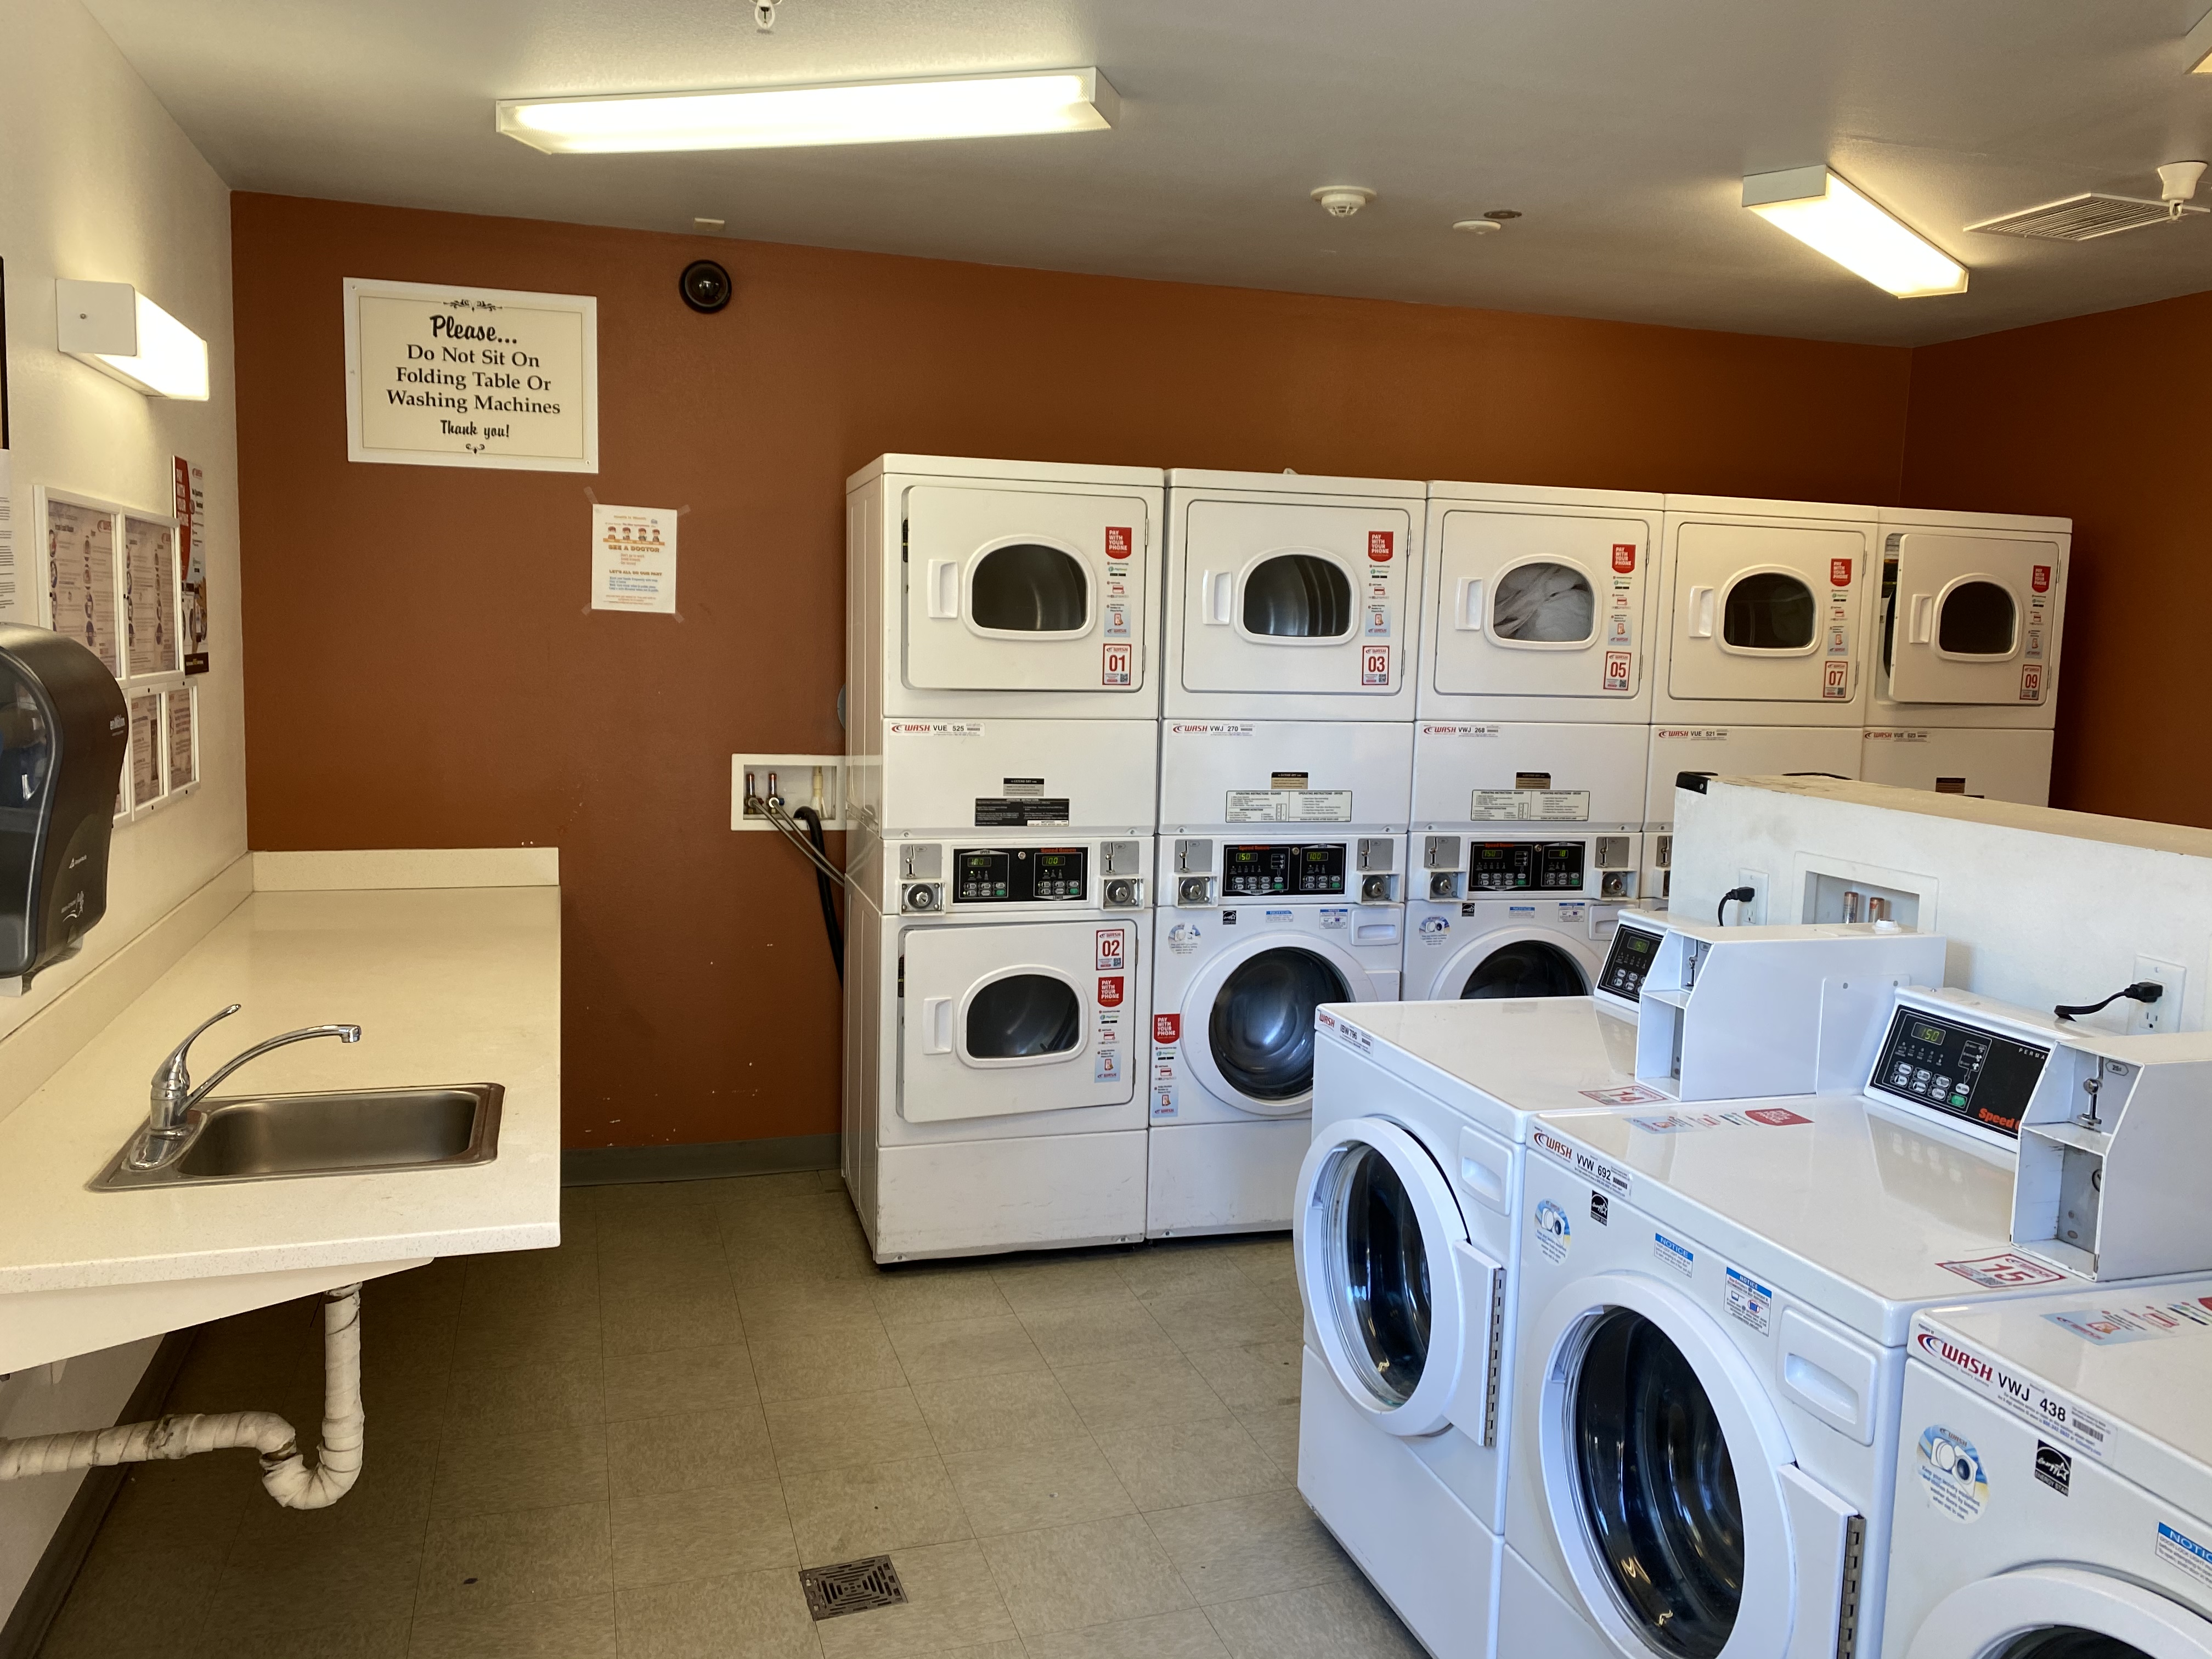 Riverwalk apartments laundry room. ten stacked dryers along wall and washers side by side near center of room. long folding table with sink. security camera in teh laundry room